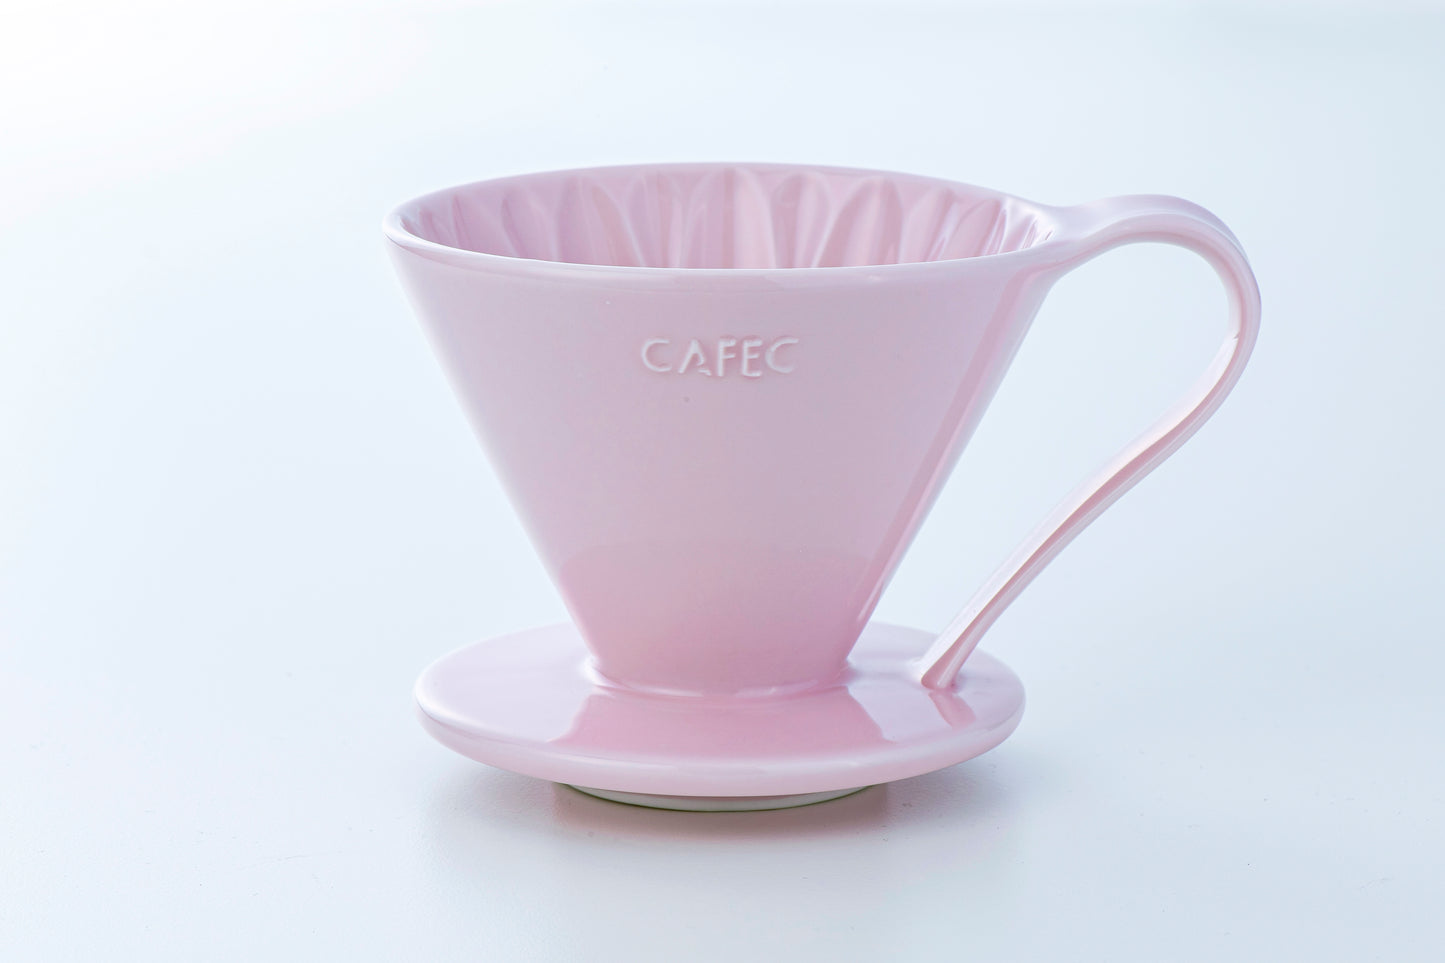 Cafec Flower dripper Cup-04 Cone-Shaped